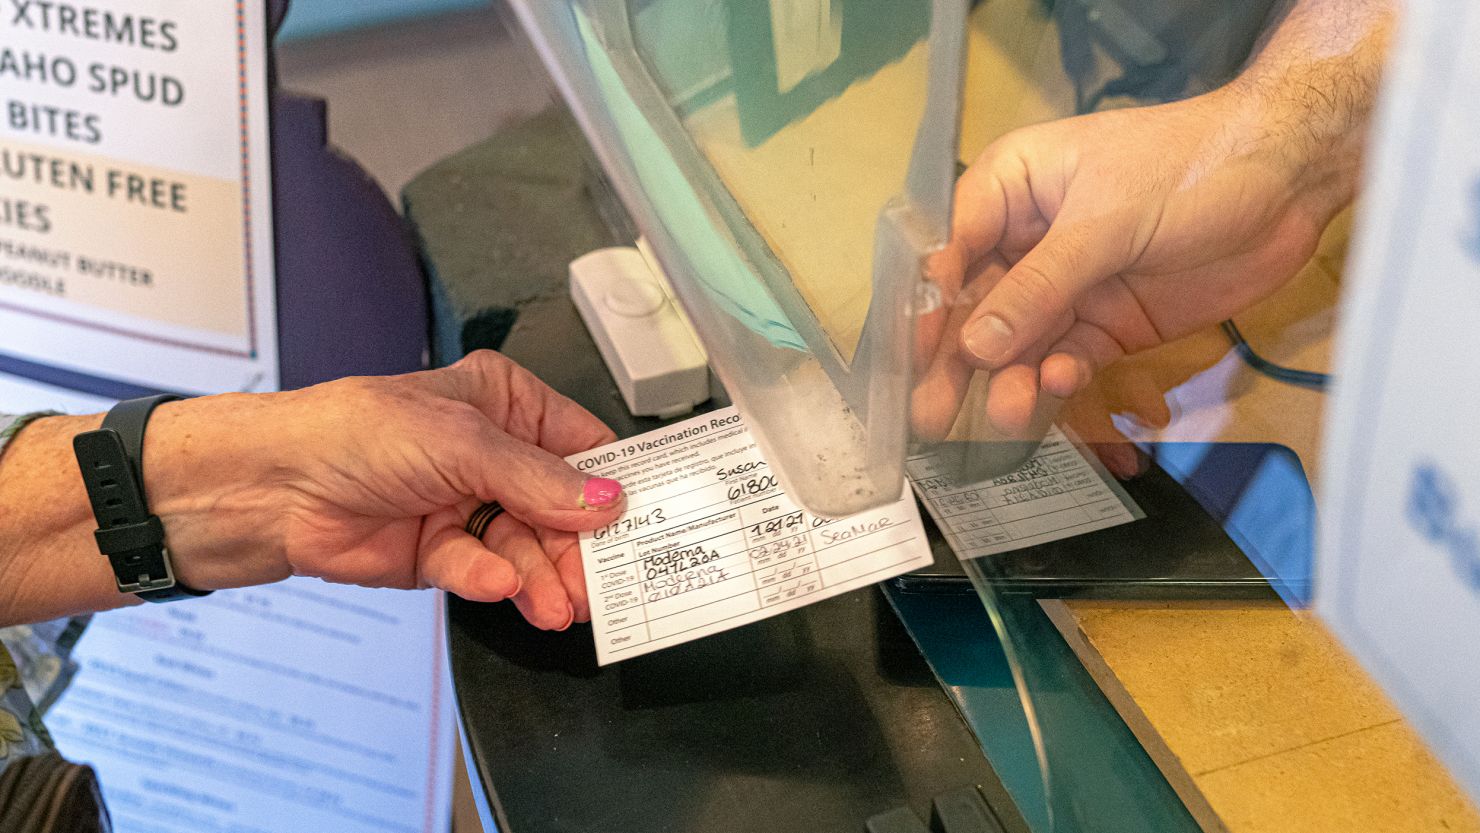 A woman presents her vaccine card at Liberty Theatre in Camas, Washington, on May 14 after Gov. Jay Inslee announced that the statewide mask mandate would no longer apply to fully vaccinated adults.